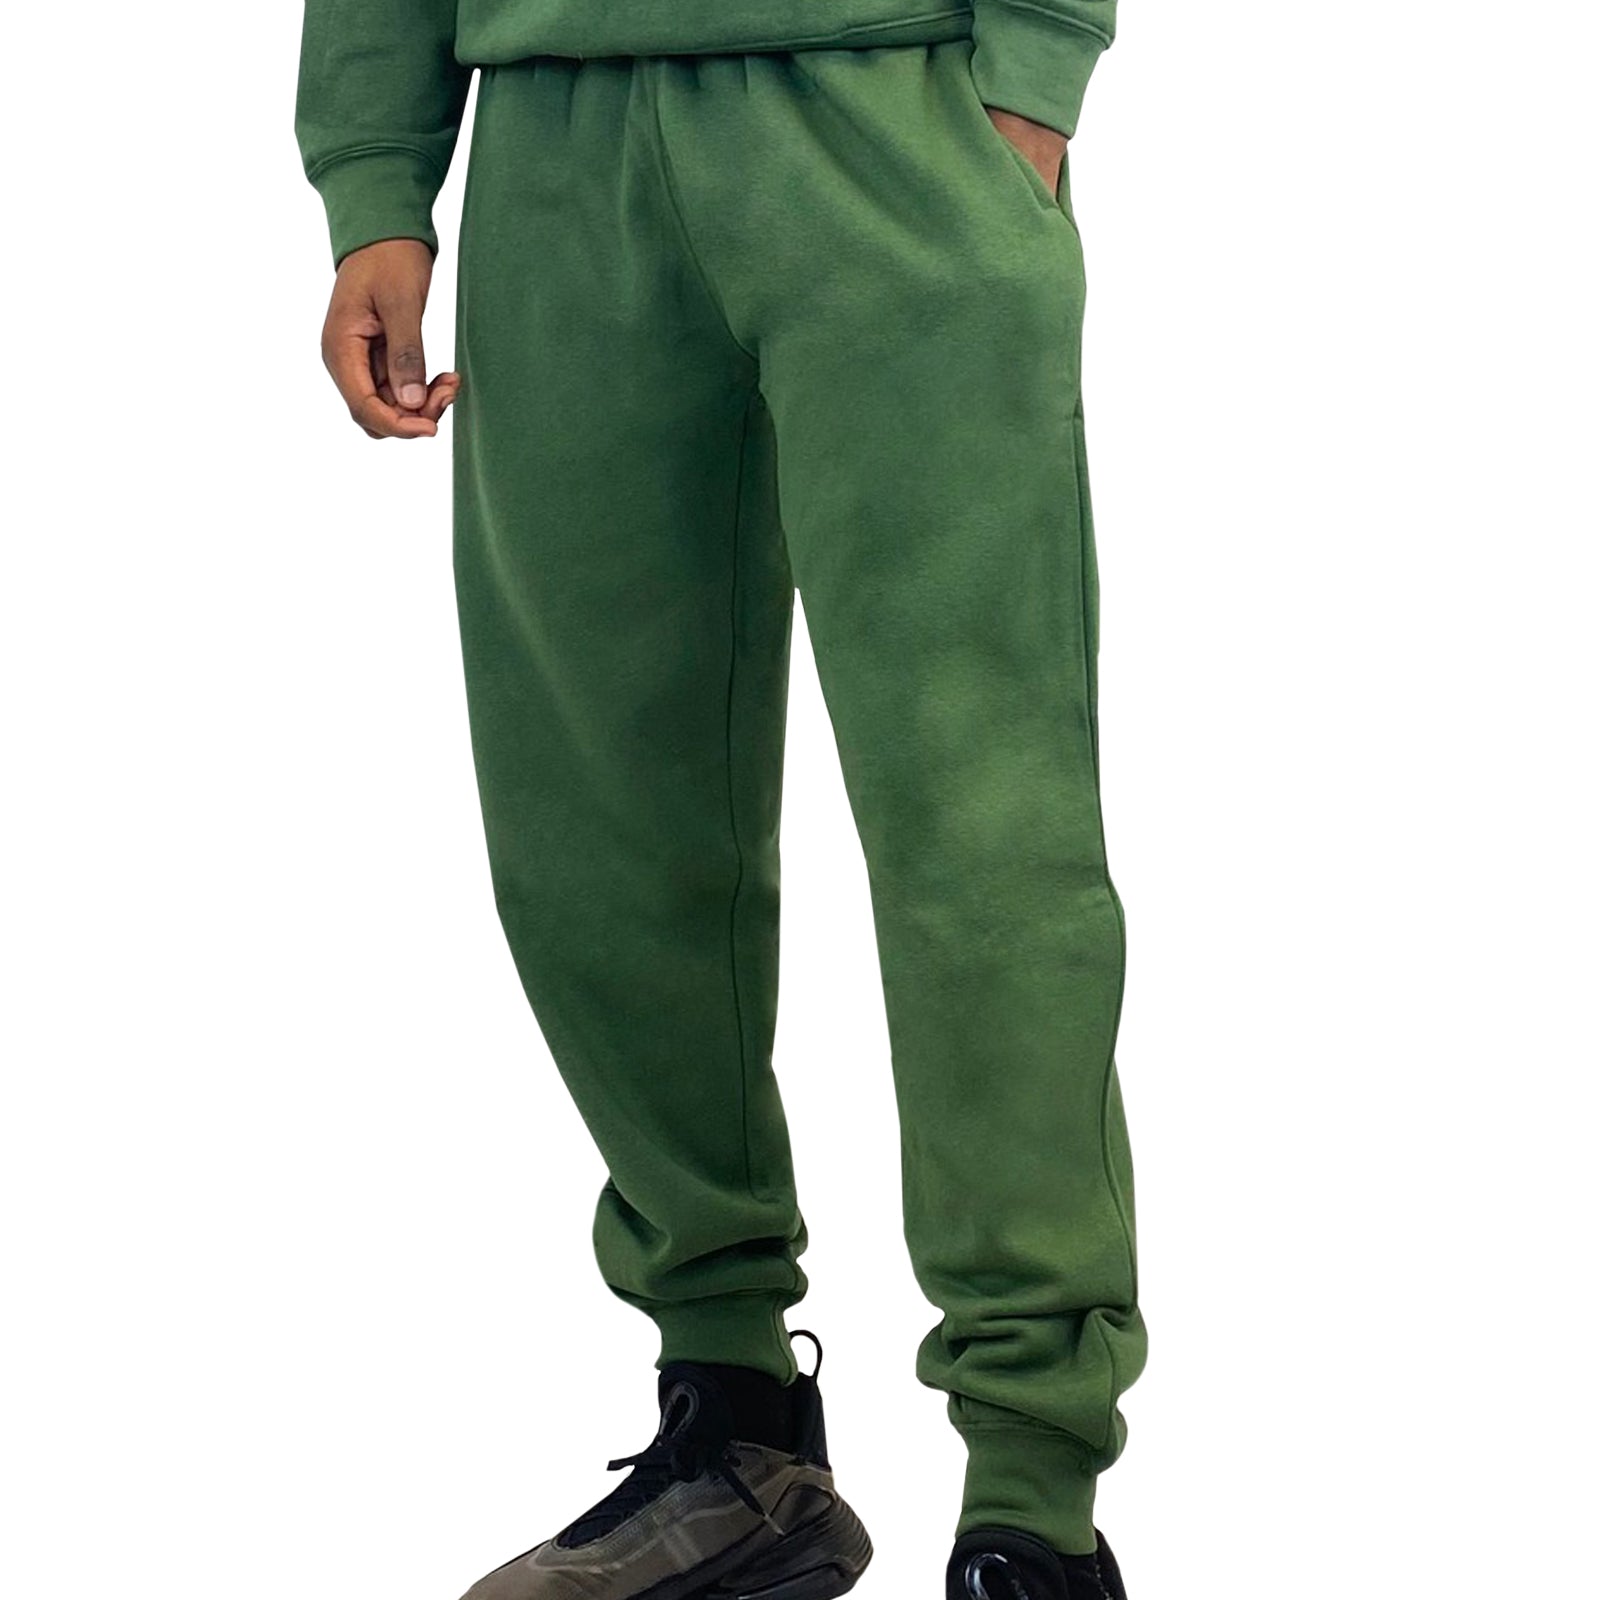 Mens Joggers - Black Forest (Green)